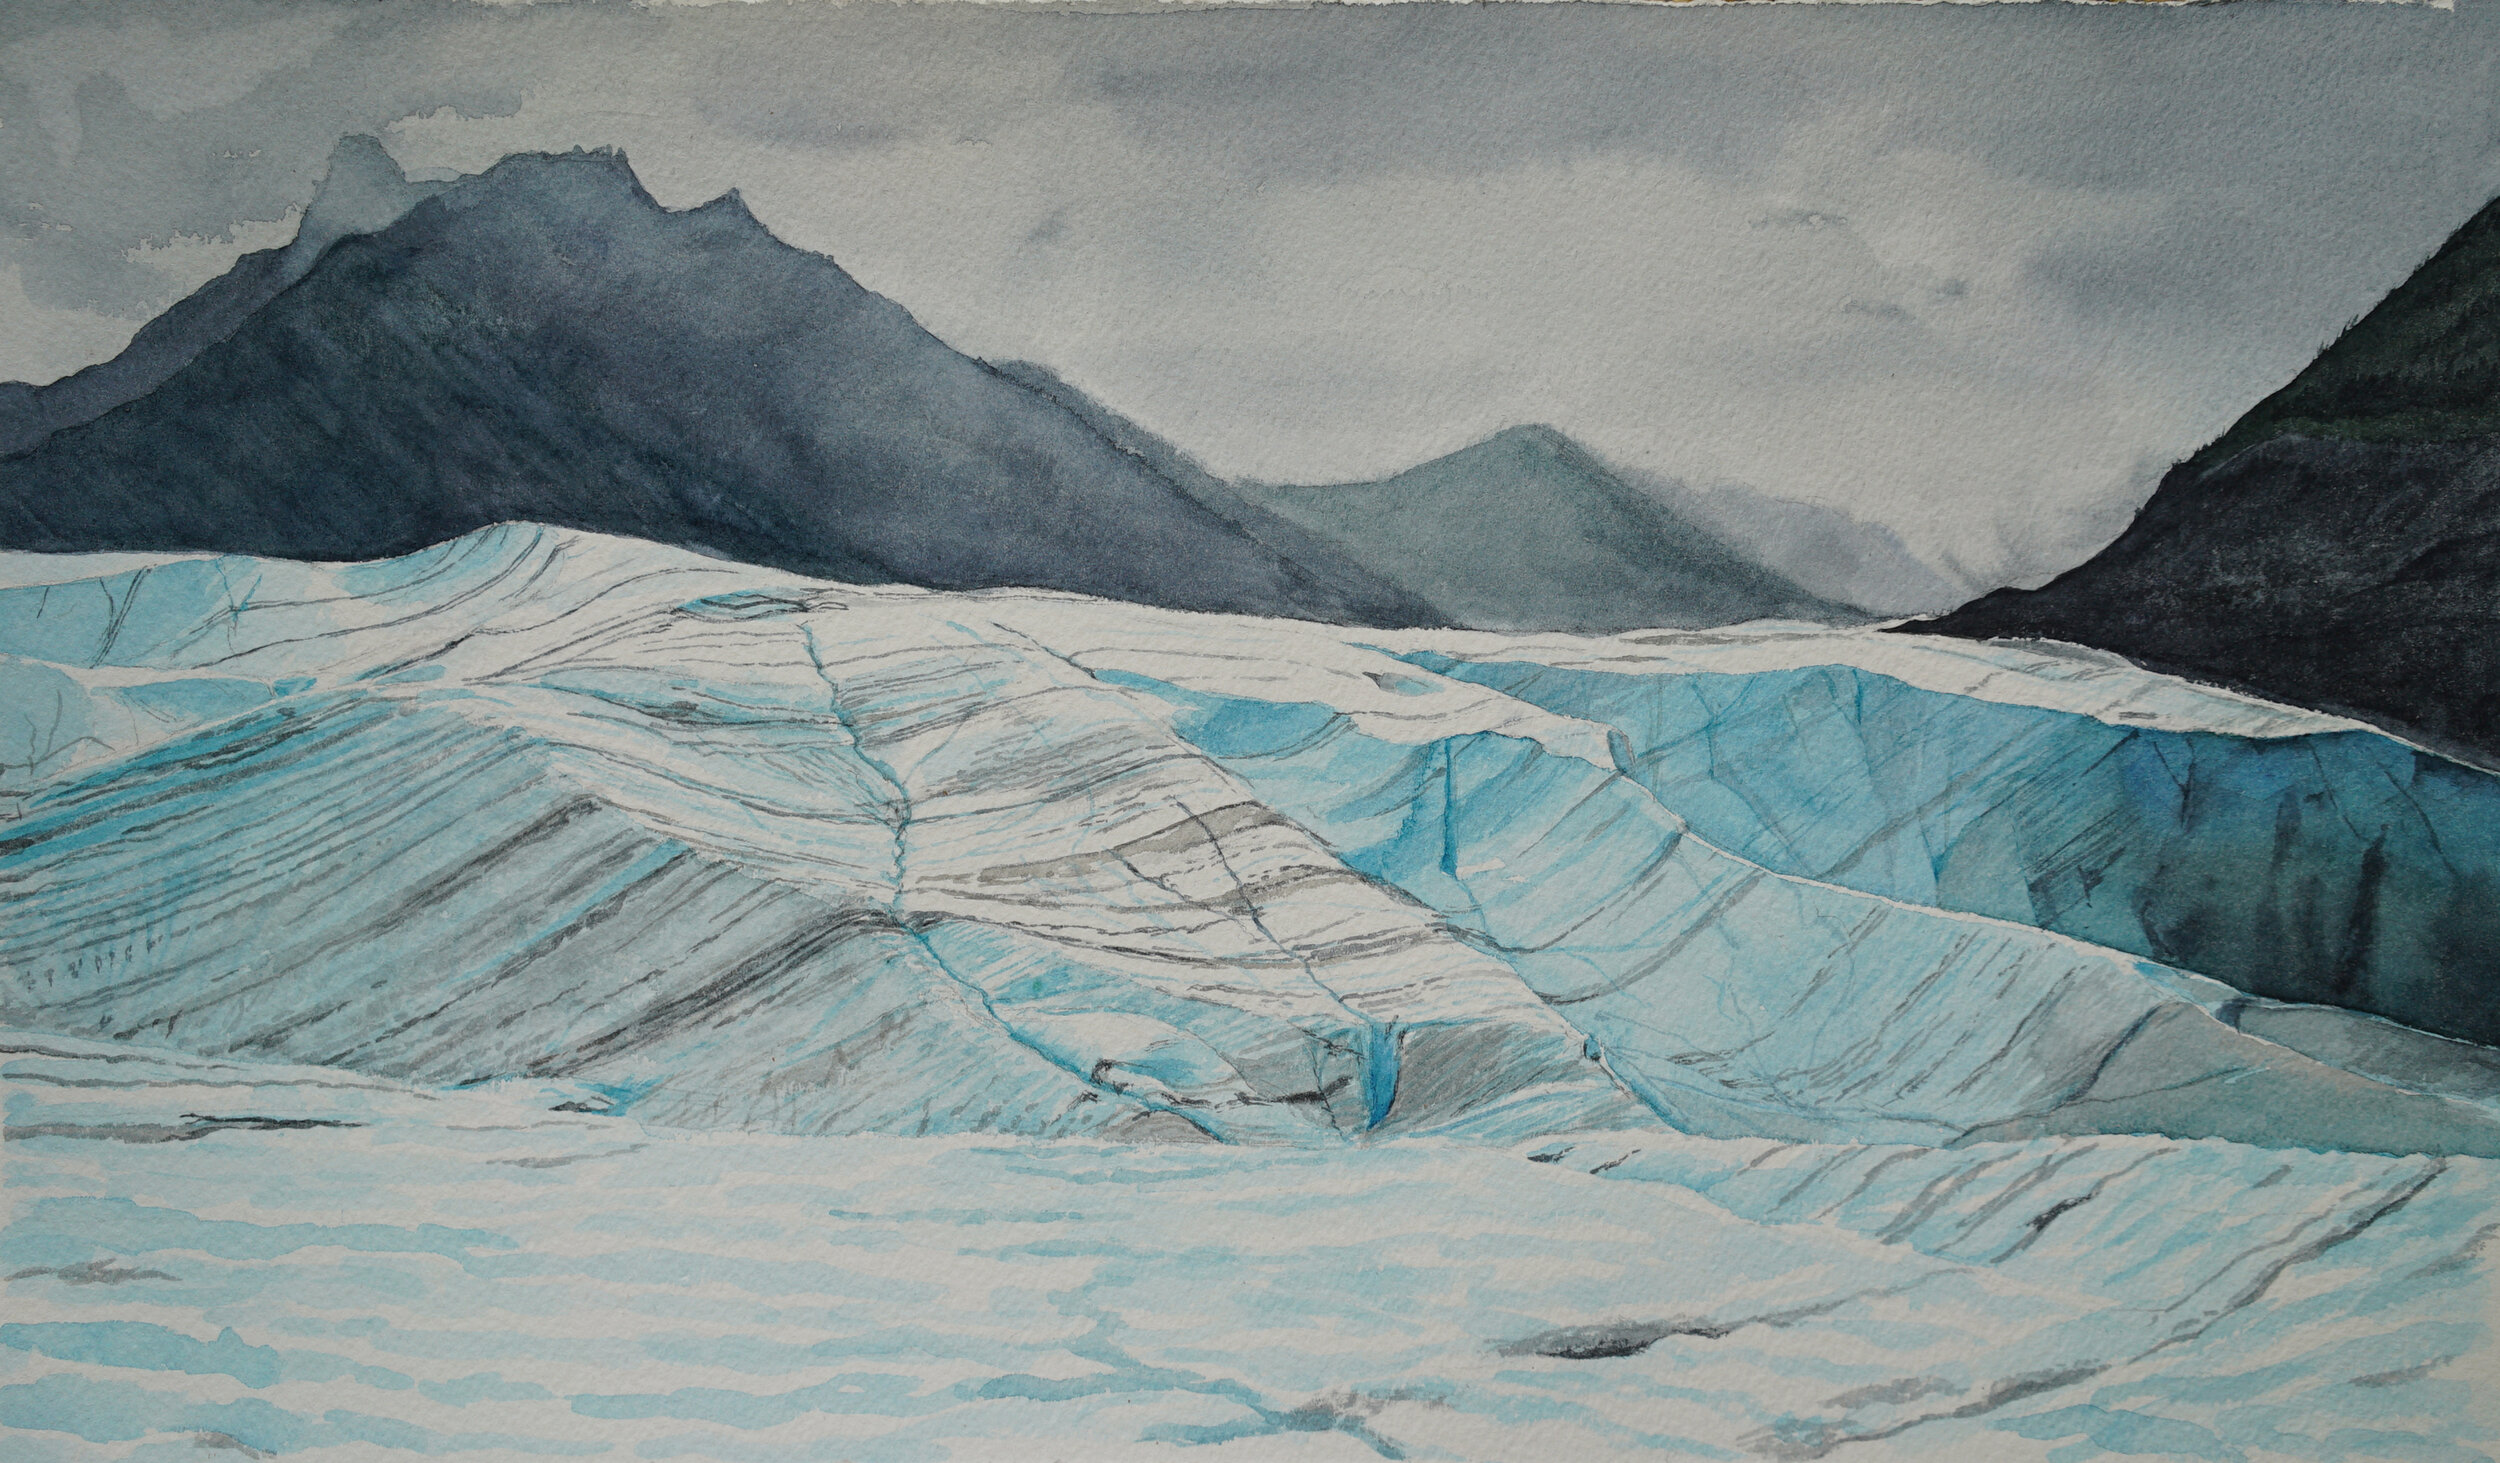 Root Glacier on a Gray Day, 19 x 11", 2018